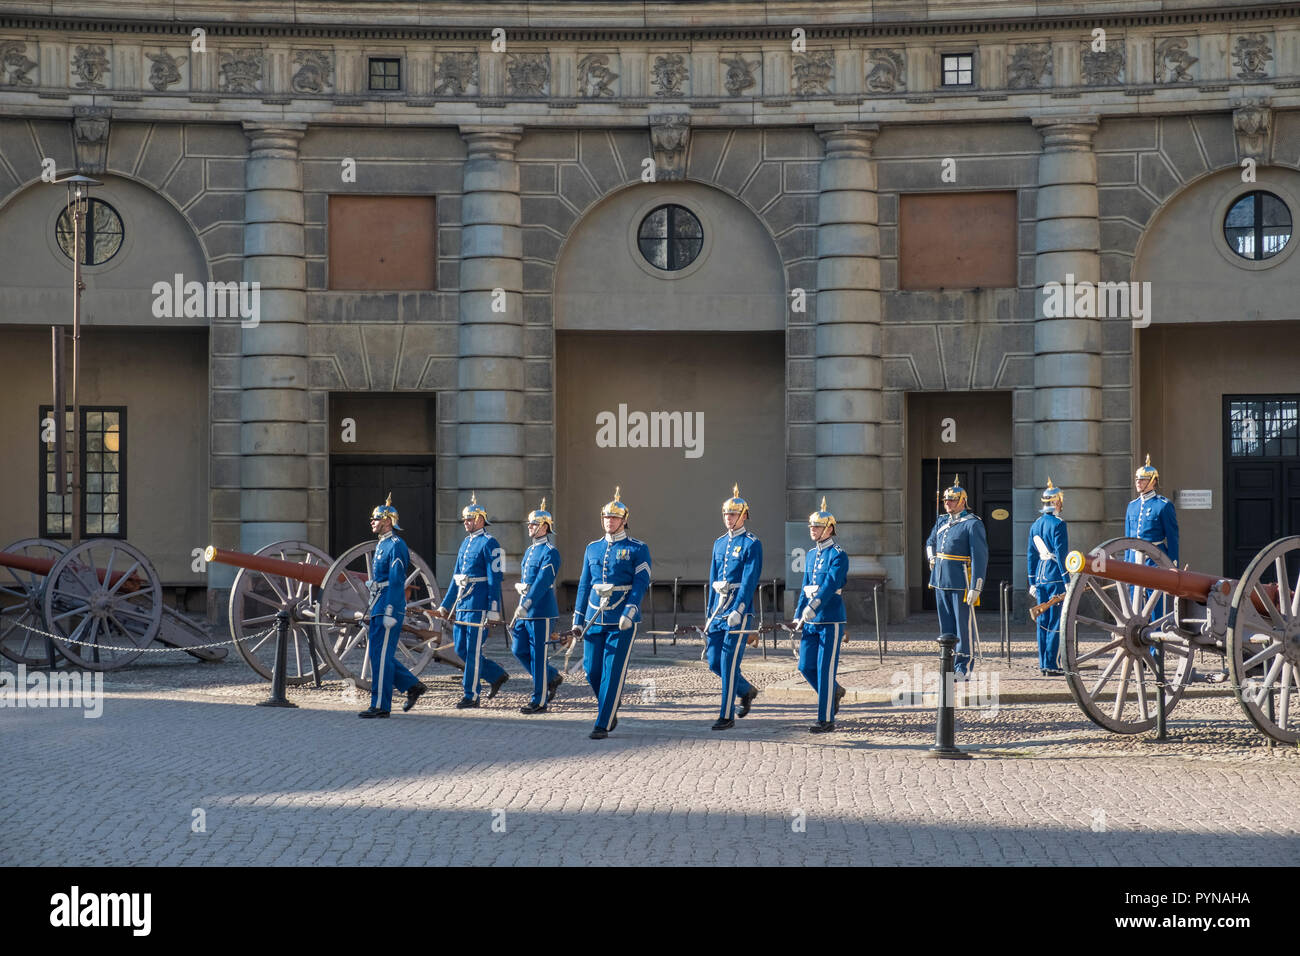 Guards in ceremonial uniform perform changing of the Guard ceremony, Royal Palace, Gamla Stan, Stockholm, Sweden. Stock Photo